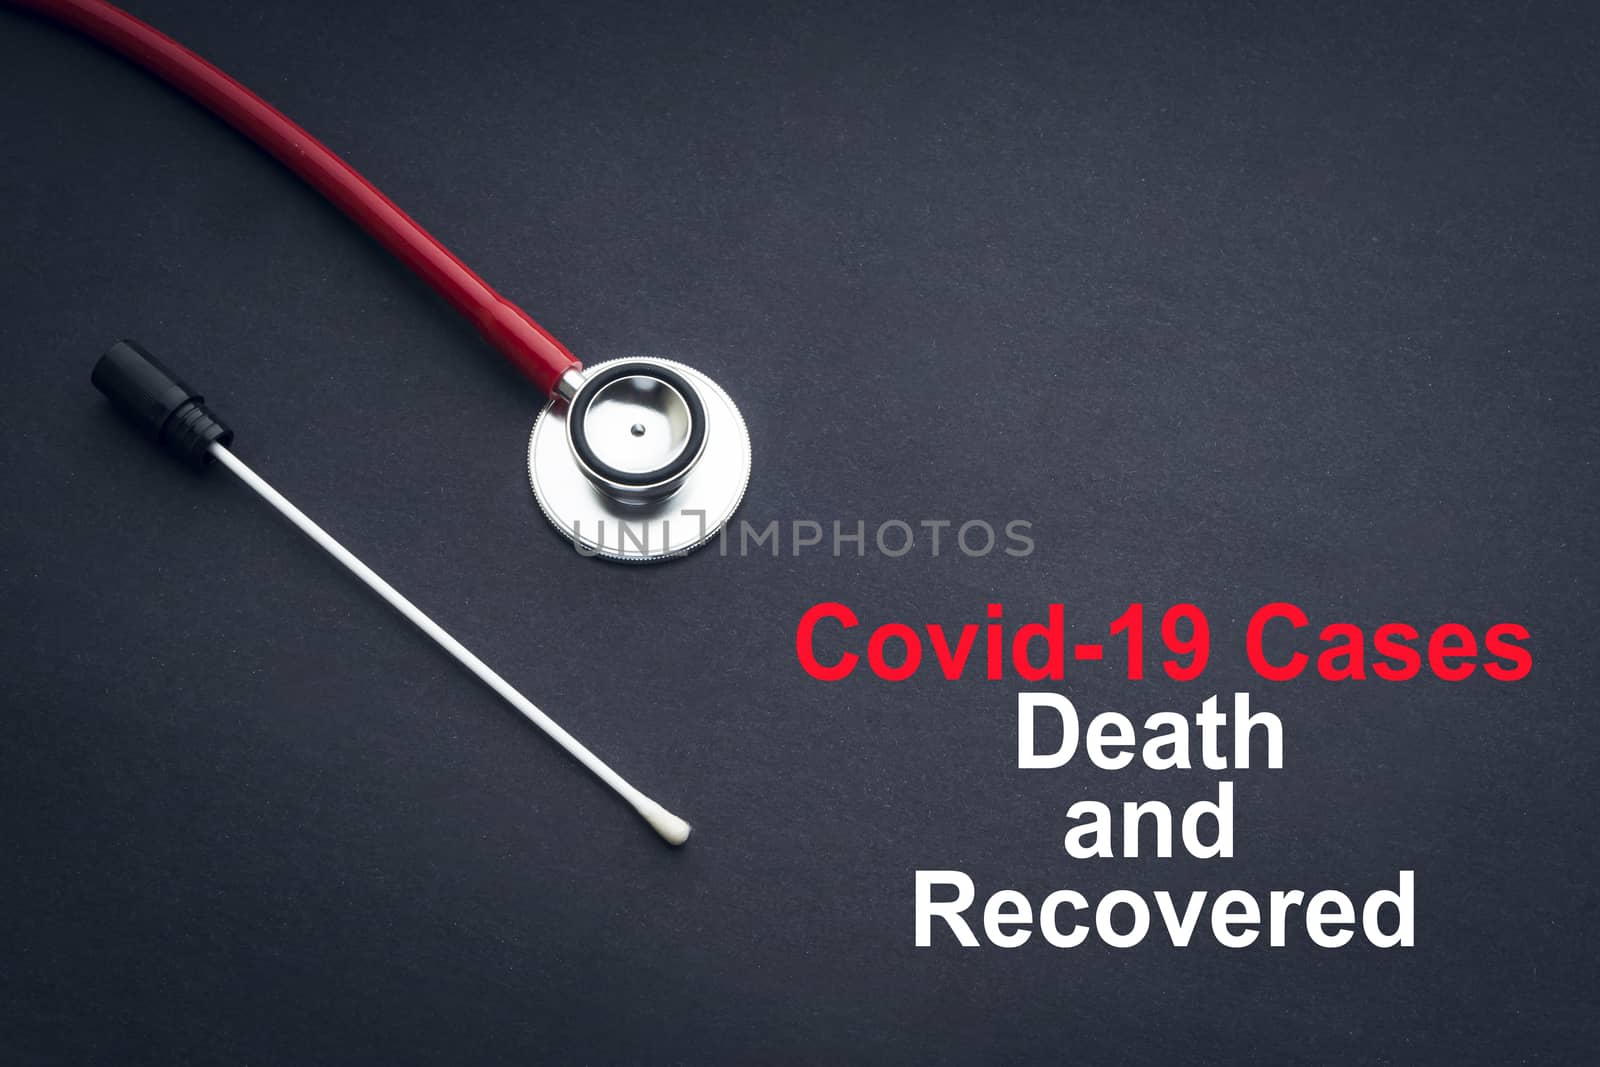 COVID-19 or CORONAVIRUS DEATH AND RECOVERED text with stethoscope and medical swab on black background by silverwings